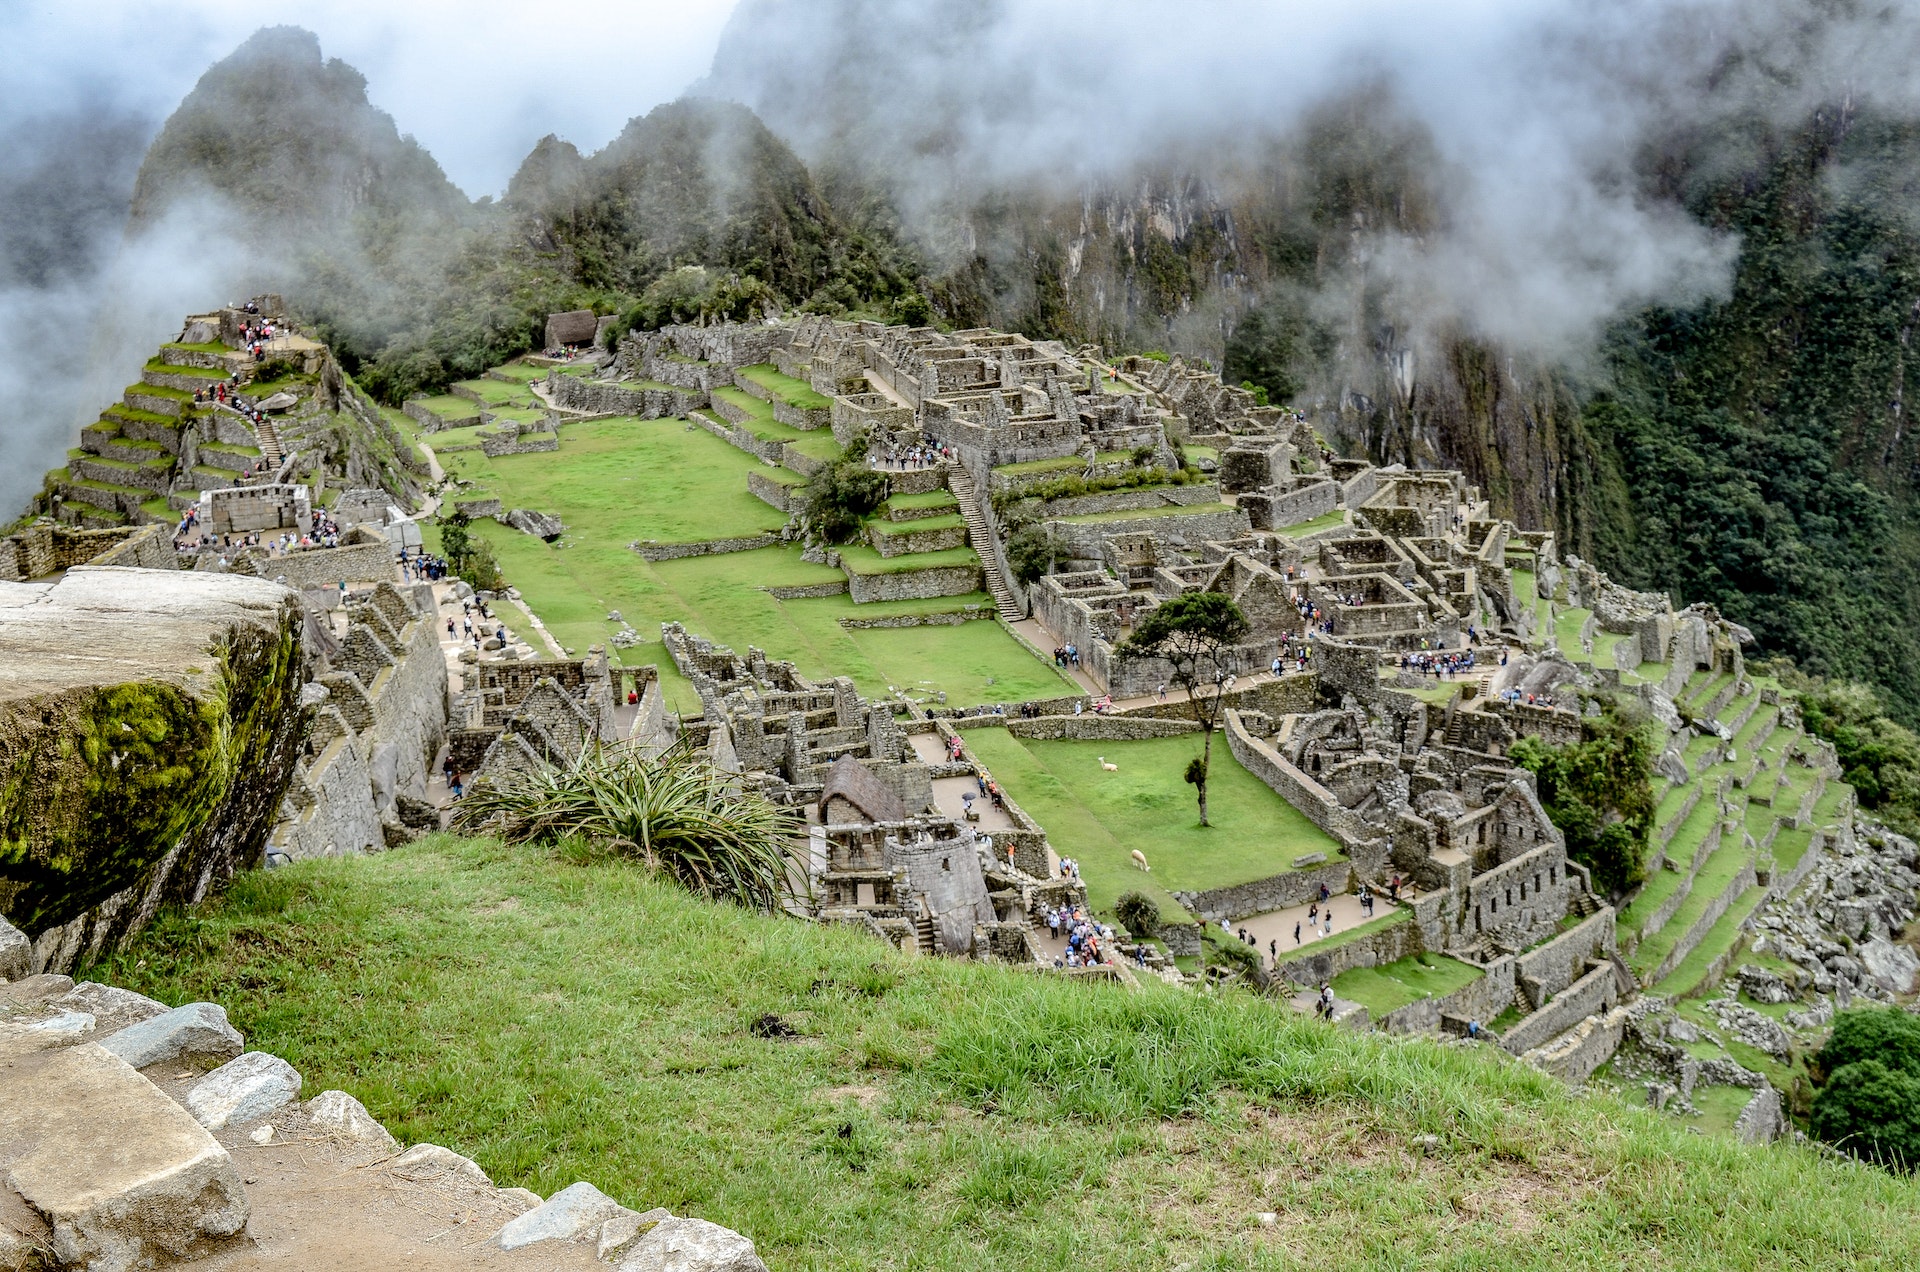 Archaeological Tours Of Peru - Discovering Ancient Treasures